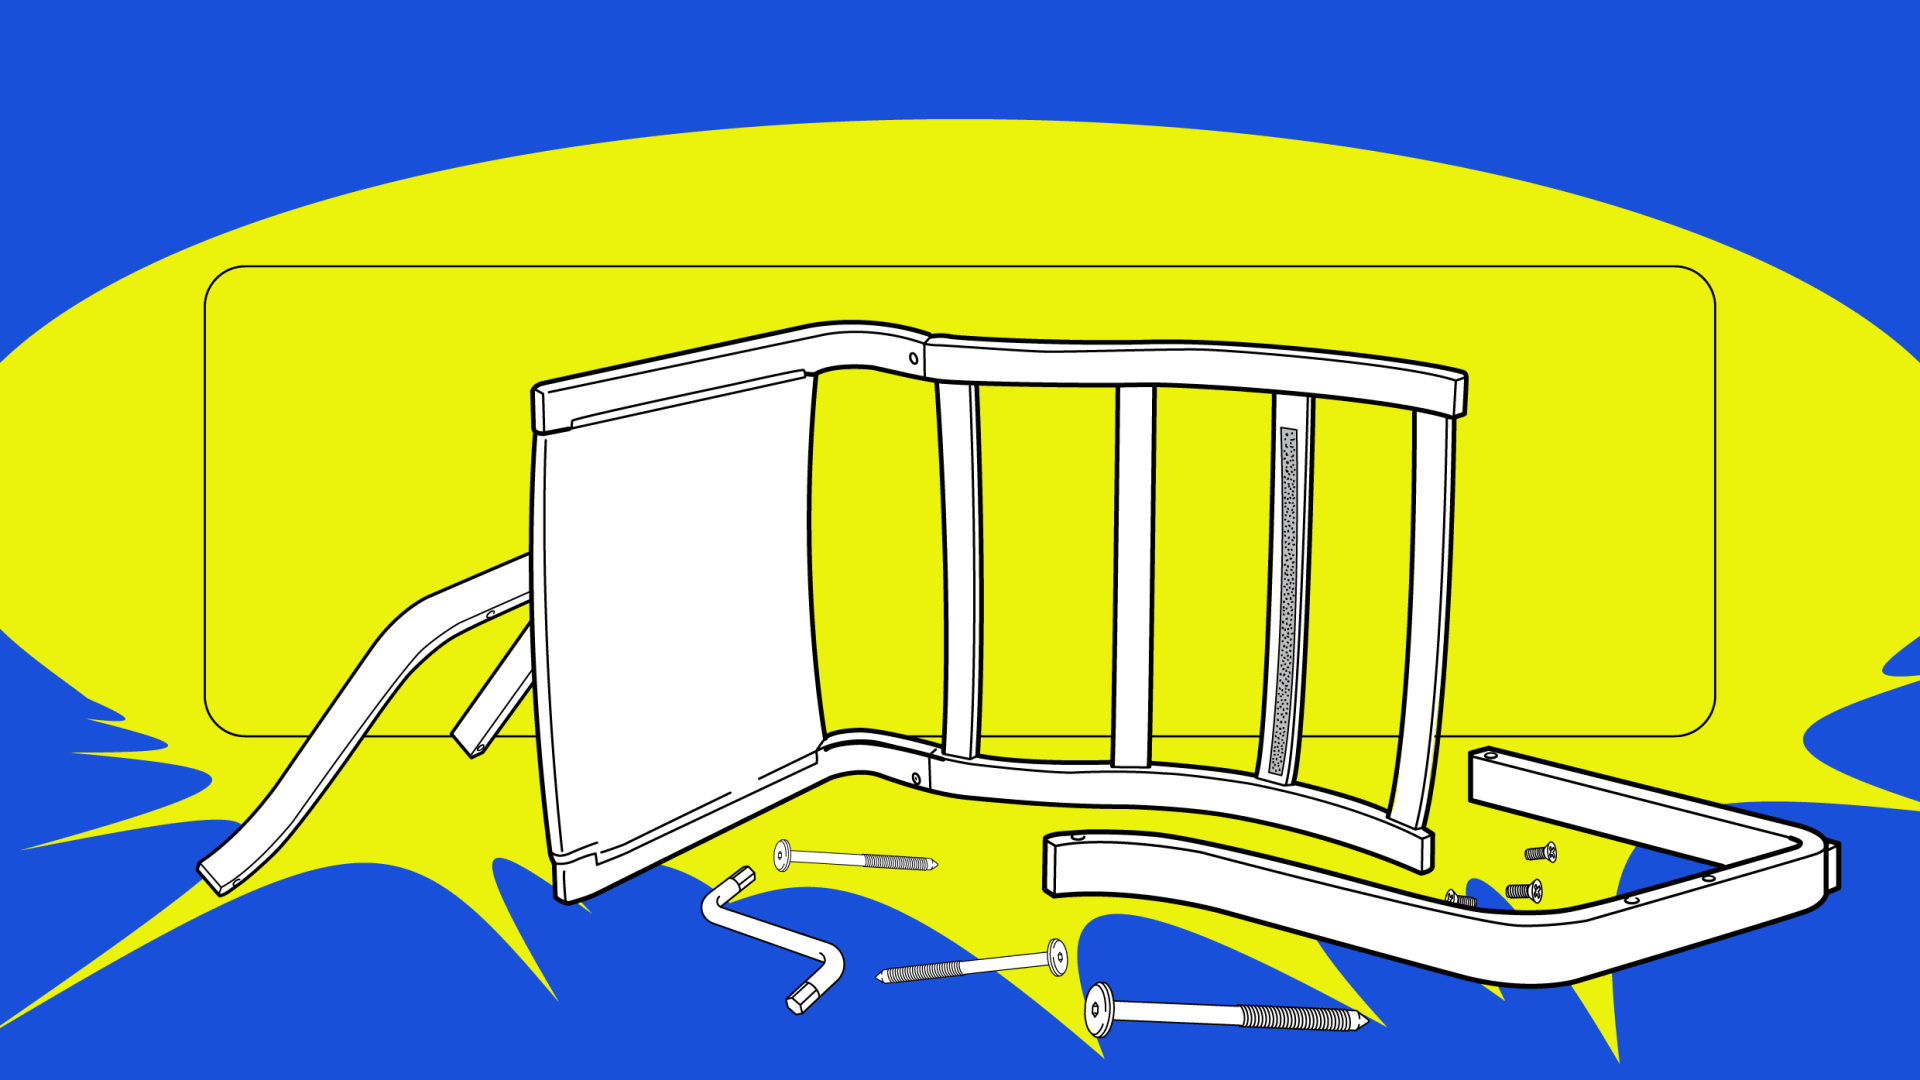 Ikea’s e-commerce was already pretty bad. During COVID-19, it absolutely fell apart